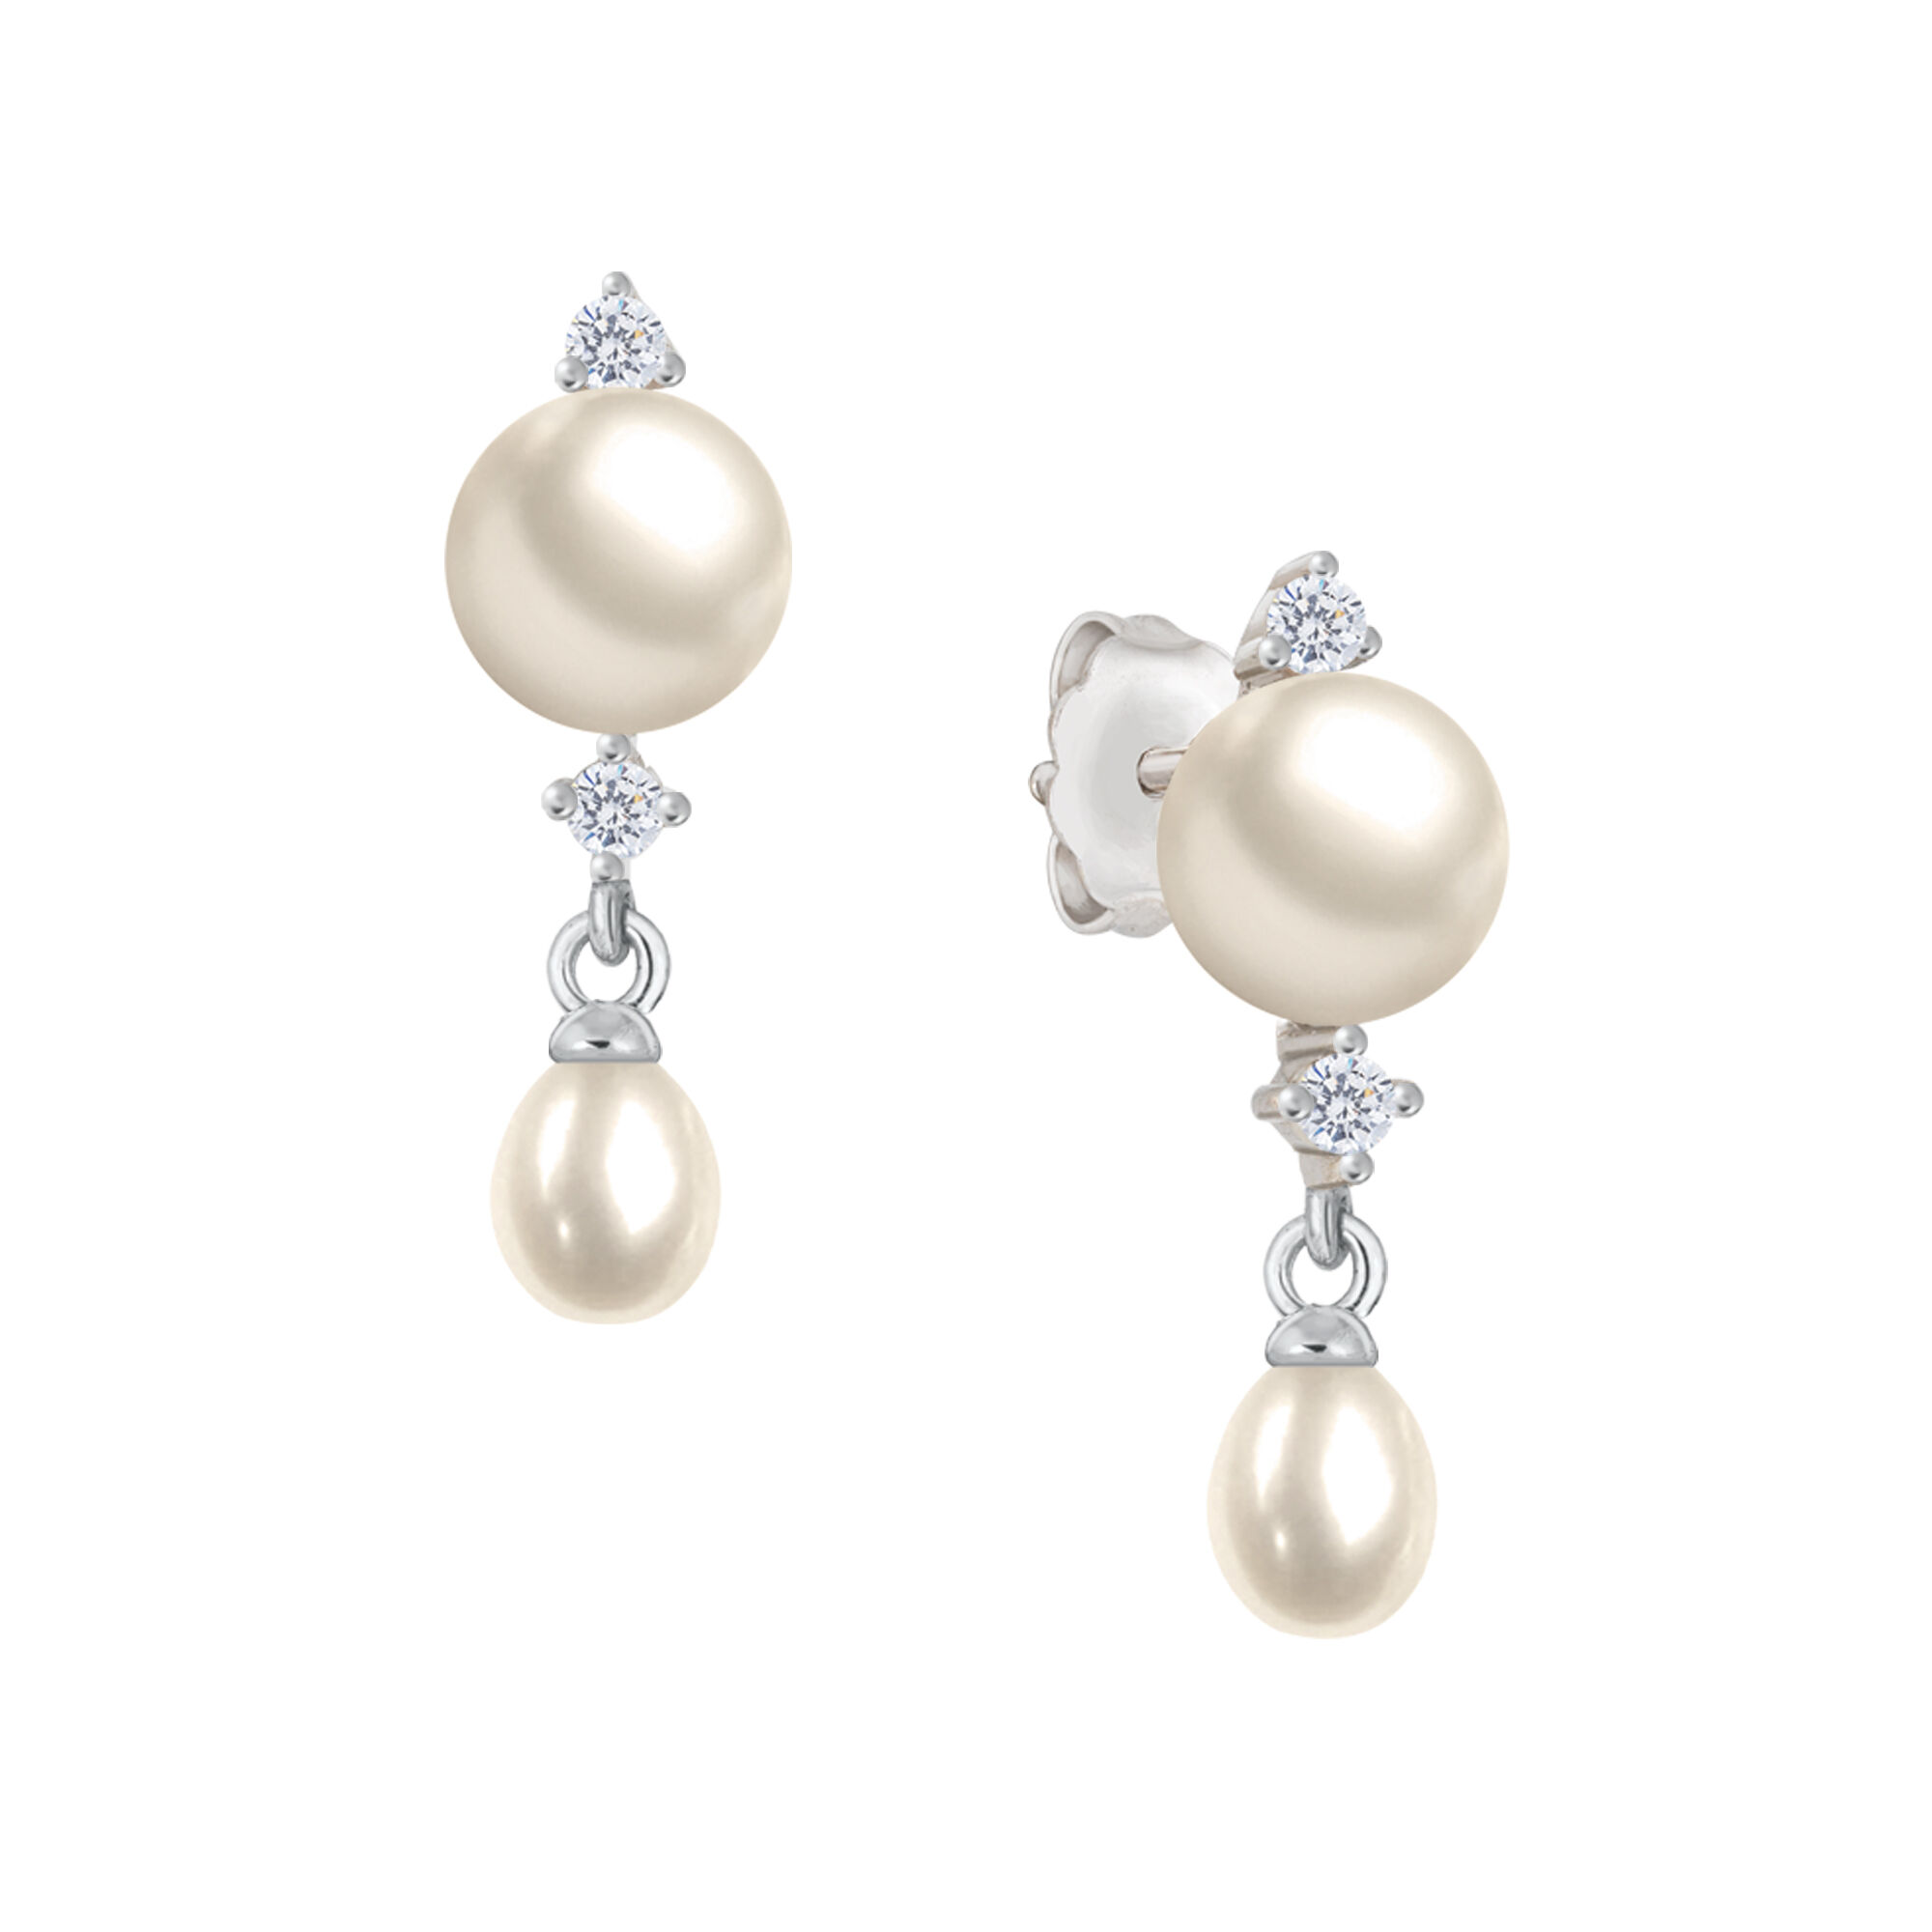 Cascading Pearls Necklace and Earring Set 6741 0019 c earring